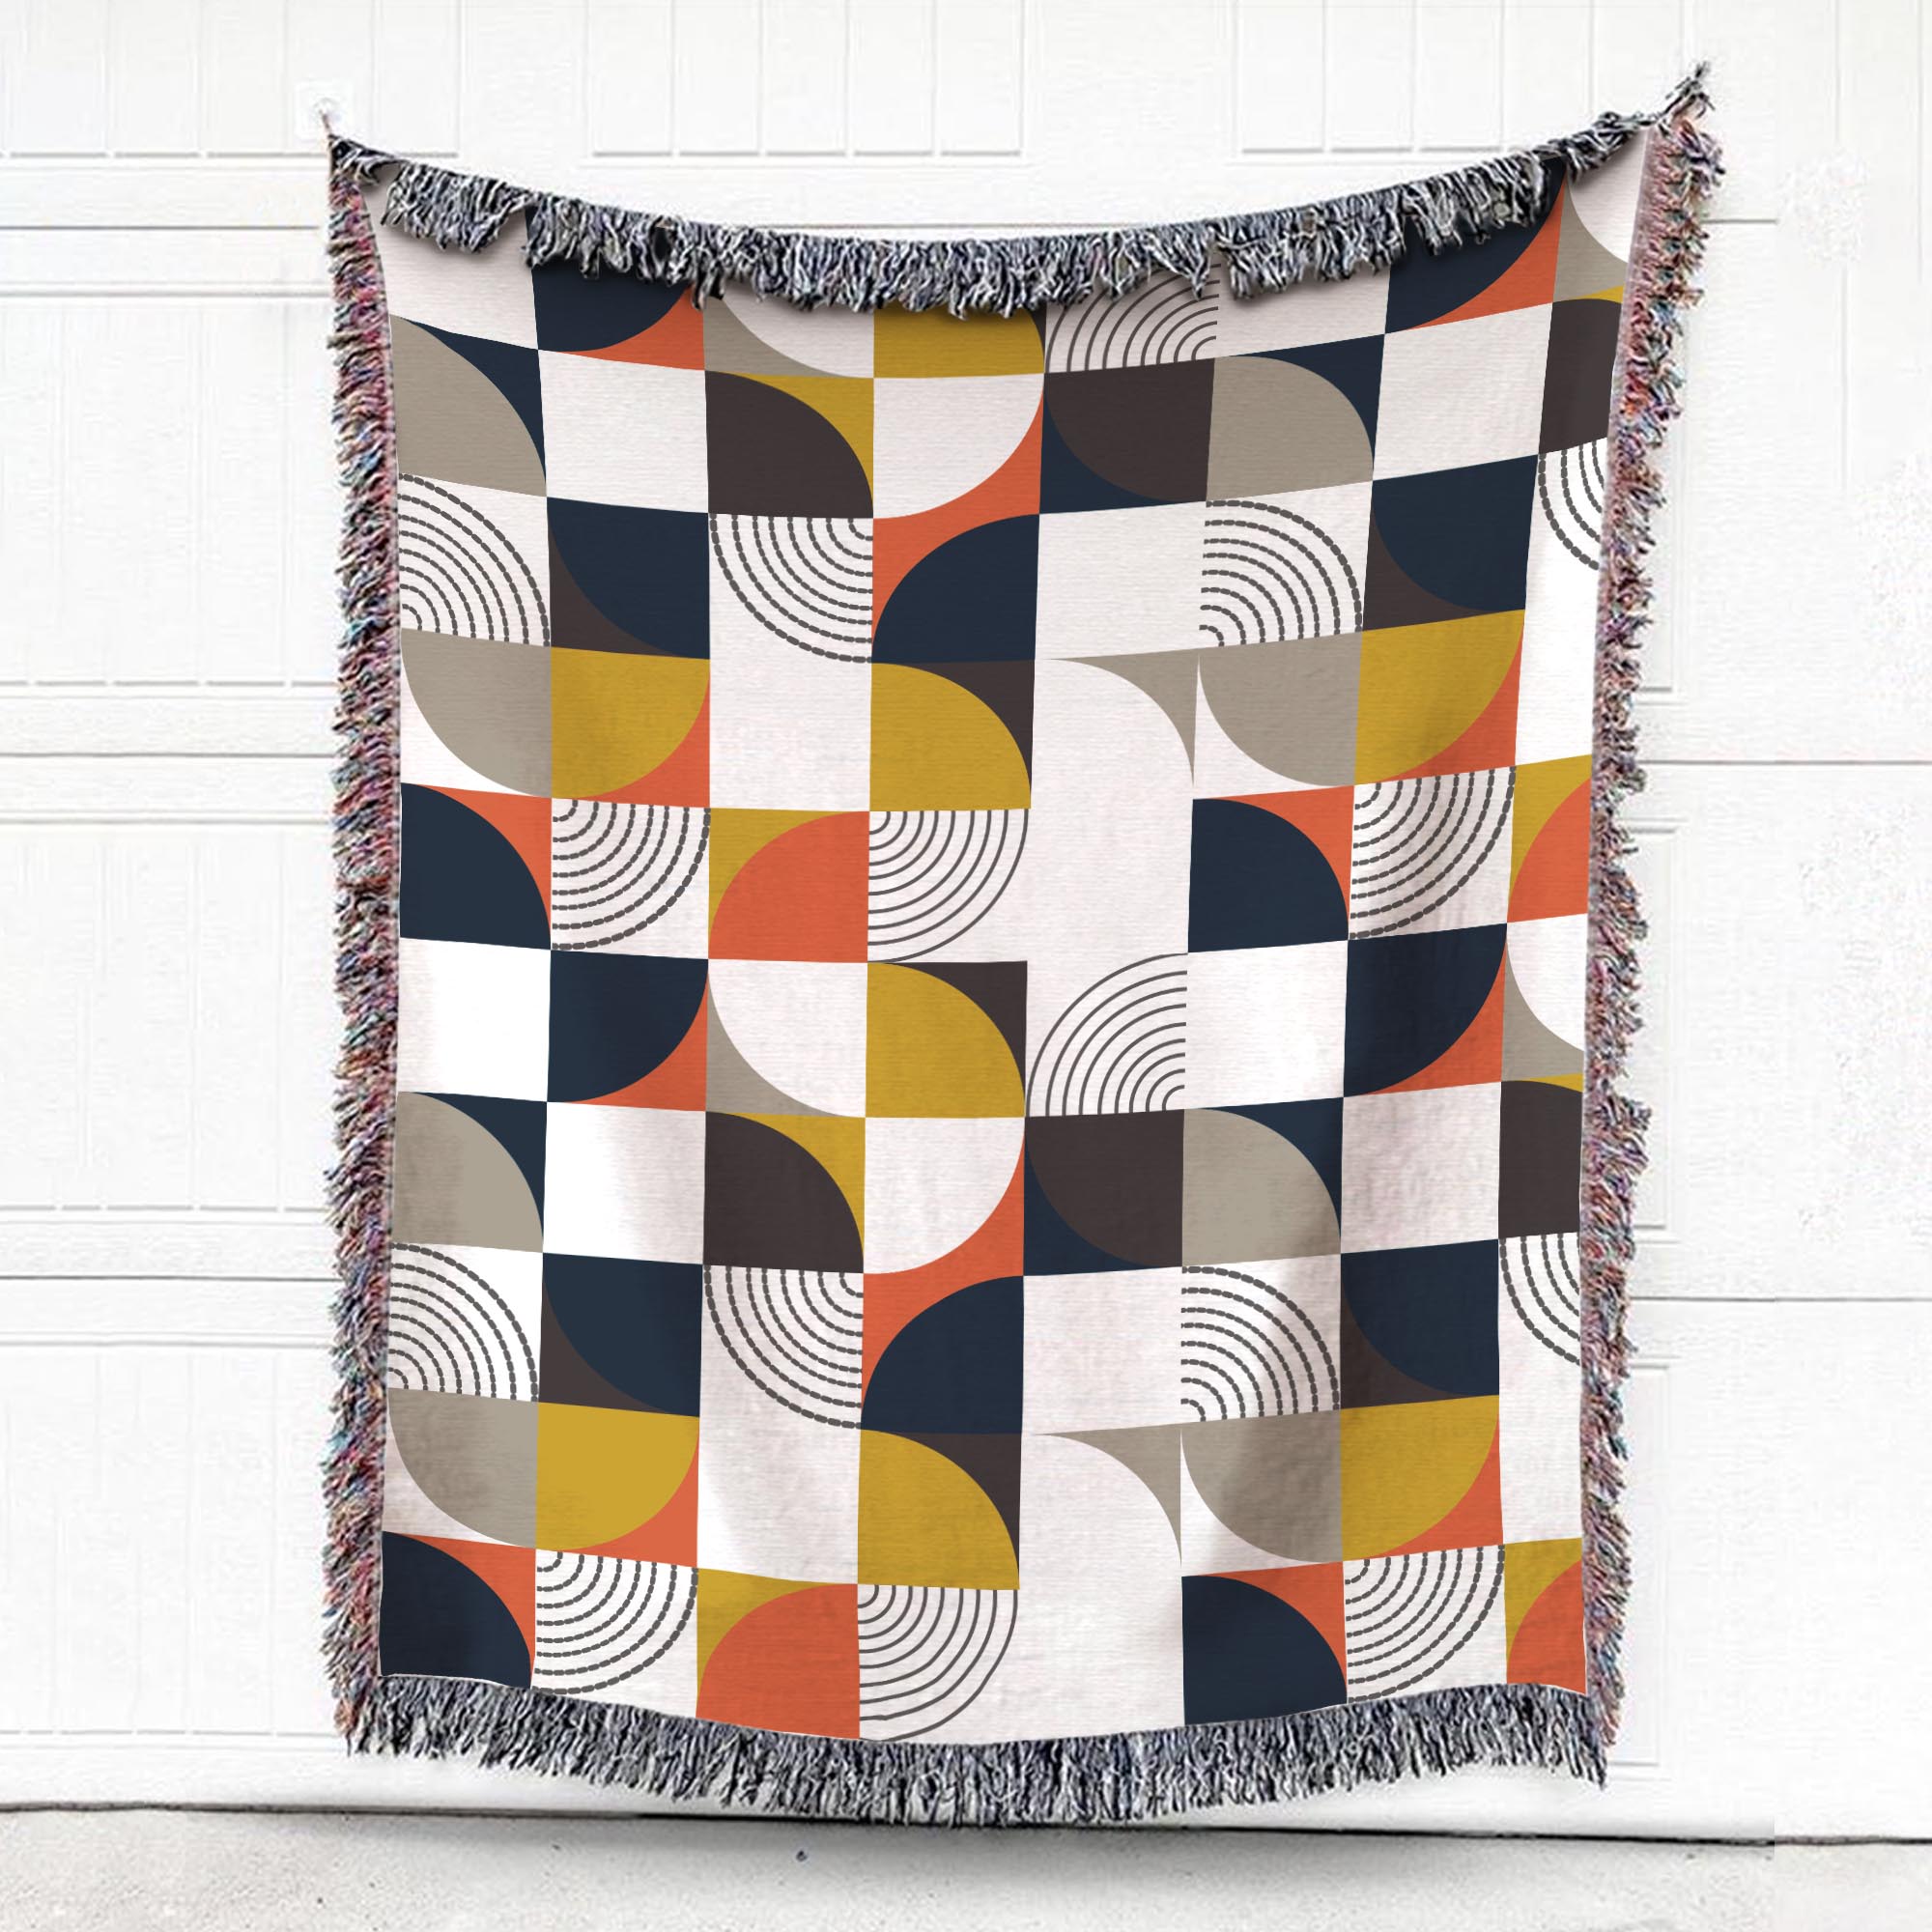 Geometric Pattern And Bauhaus Abstract Memphis Woven Blanket